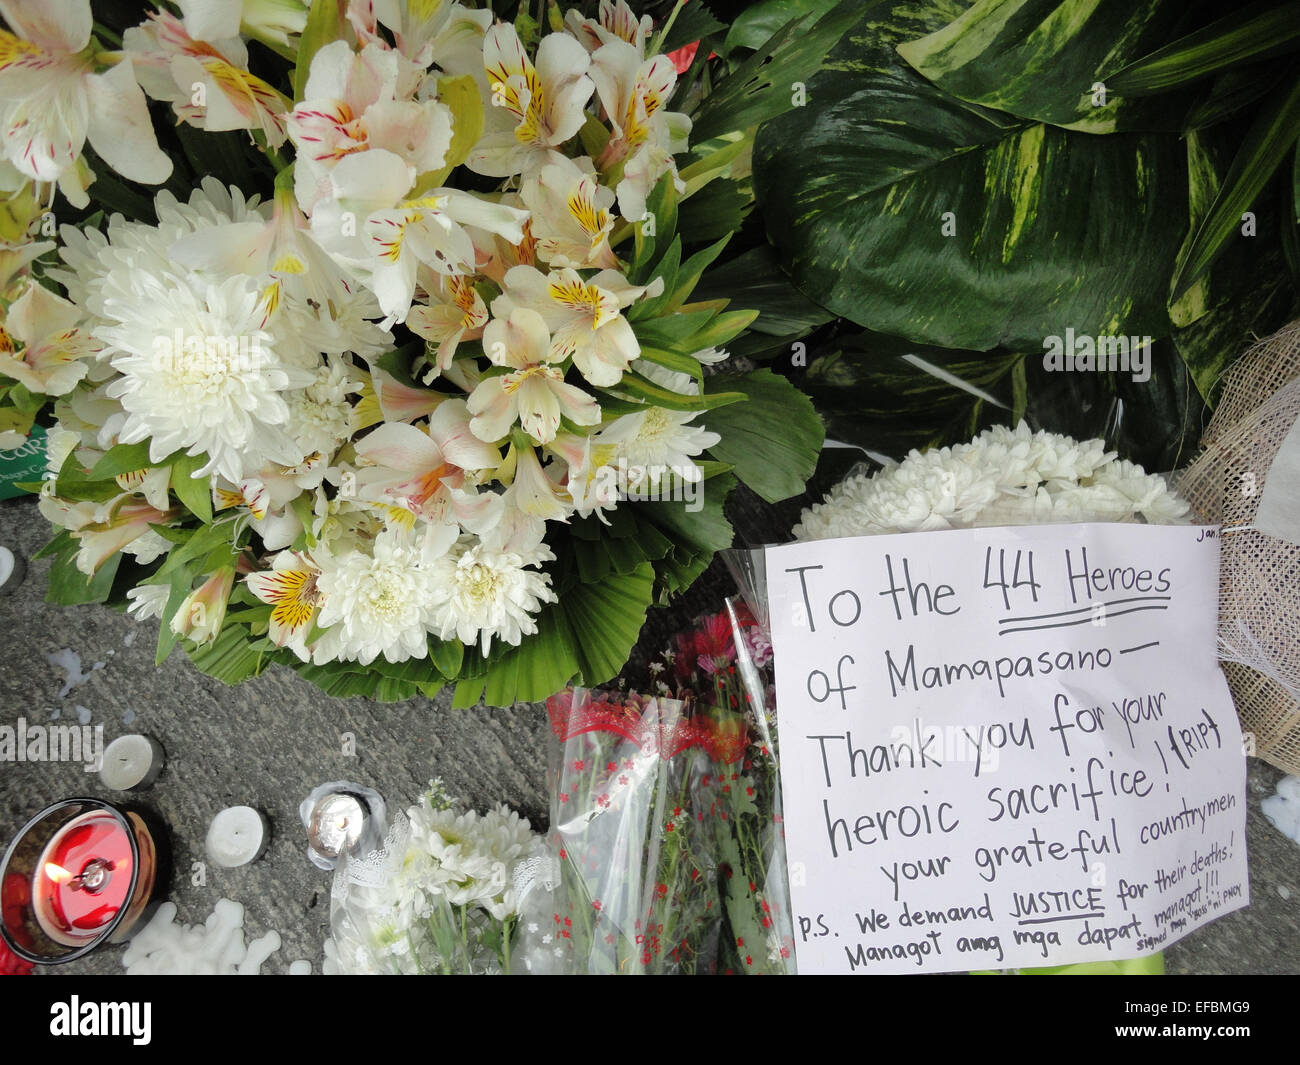 Flowers, candles, and a postcard are among the items that lay outside the Philippine National Police headquarters. Philippine President Benigno Aquino III declared a National Day of Mourning to commemorate the 44 elite commandos who were slain in an encounter at Mamasapano, Maguindanao province. © Richard James Mendoza/Pacific Press/Alamy Live News Stock Photo